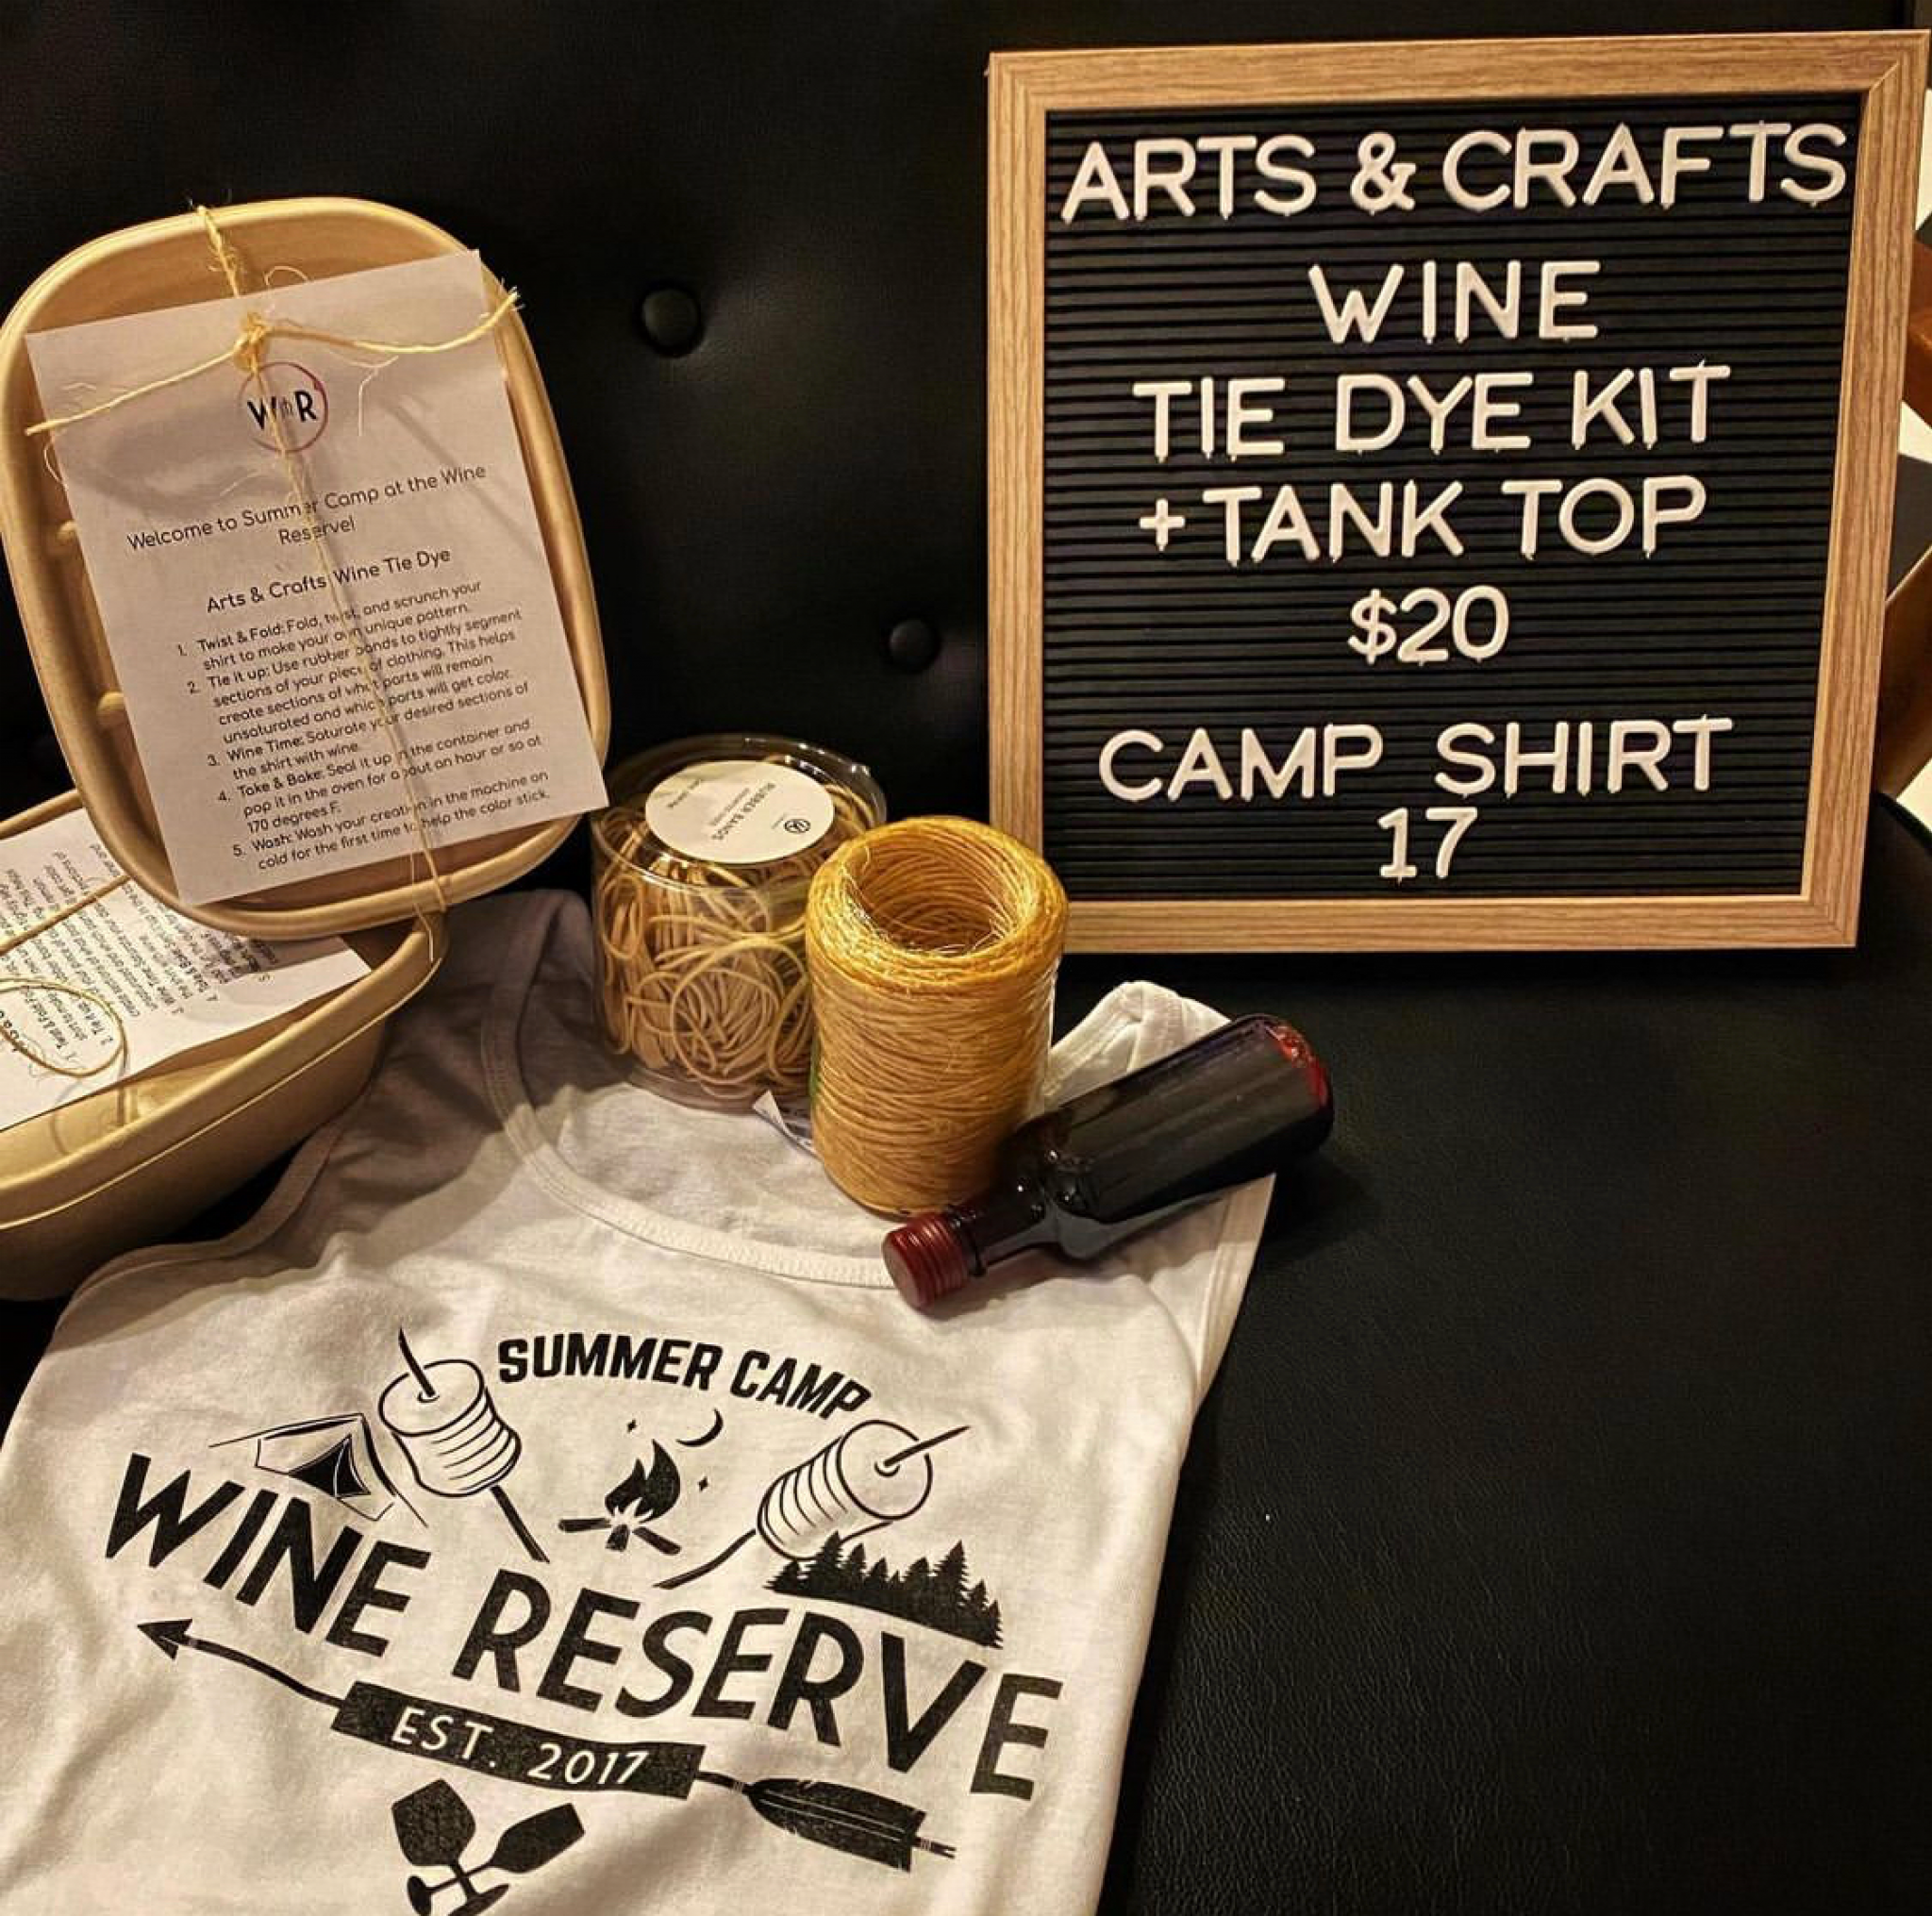 a custom t-shirt that says "Summer Cam Wine Reserve Est. 2017" along with a sign that says "Arts & Crafts Wine Tie Dye Kit + Tank Top $20 Camp Shirt 17". There are tie dye kit parts arranged around the shirt. 